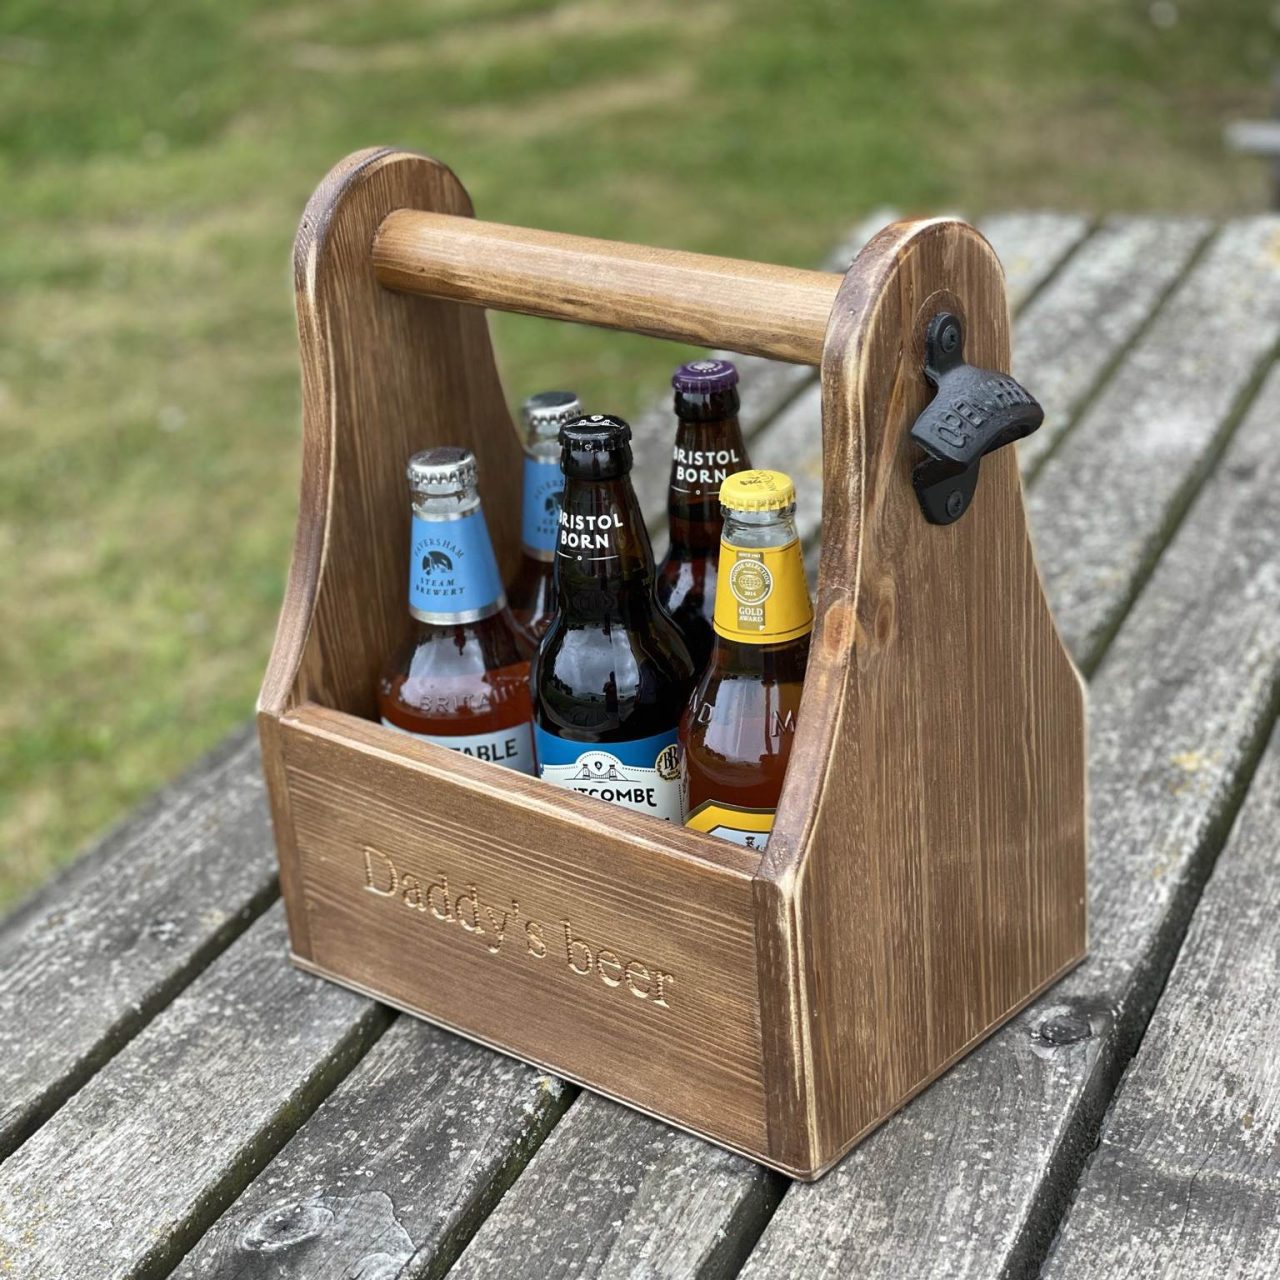 Beer 4 RETRO SHINY RED Wood Metal silver handle Pop or Water bottles caddy with bottle opener